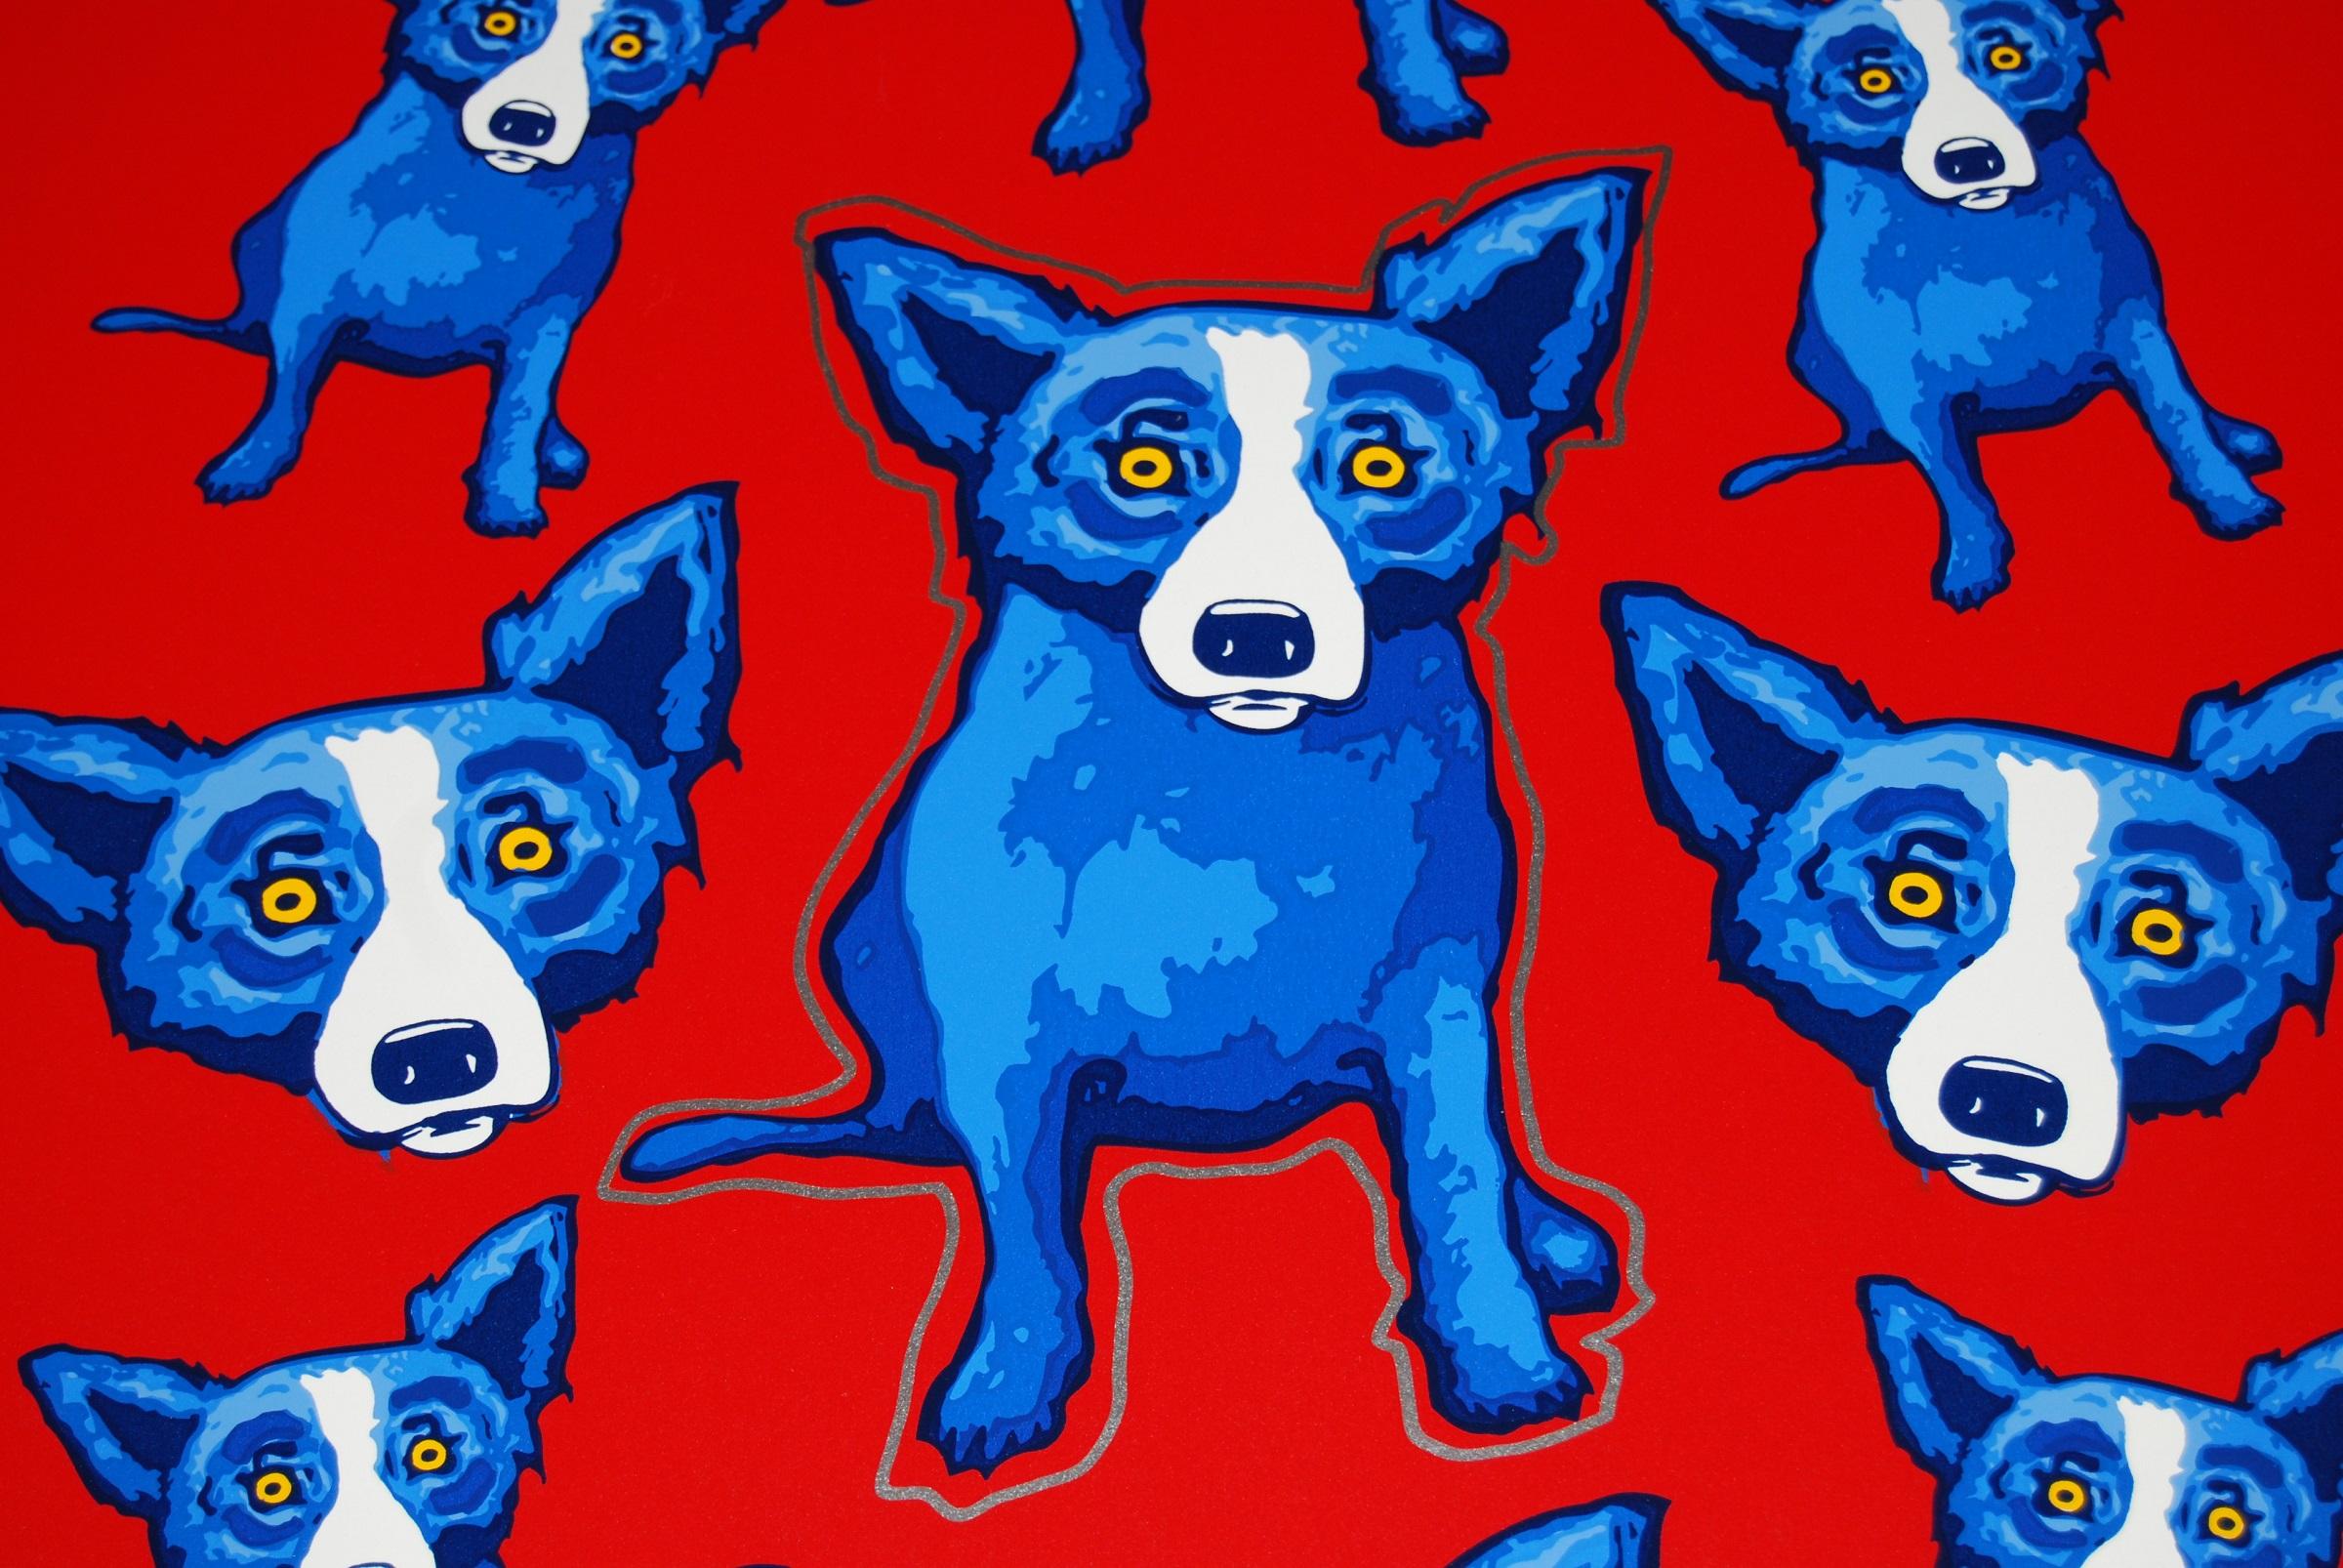 Artist:  George Rodrigue
Title:  Blue Dog “Original - Group Therapy – Red Remarqued”
Medium:  Silkscreen 
Date:  1995
Edition:  Artist Proof
Dimensions:  28 X 21”
Description:  Signed Unframed Minor blemishes in red
Condition:  Excellent 
